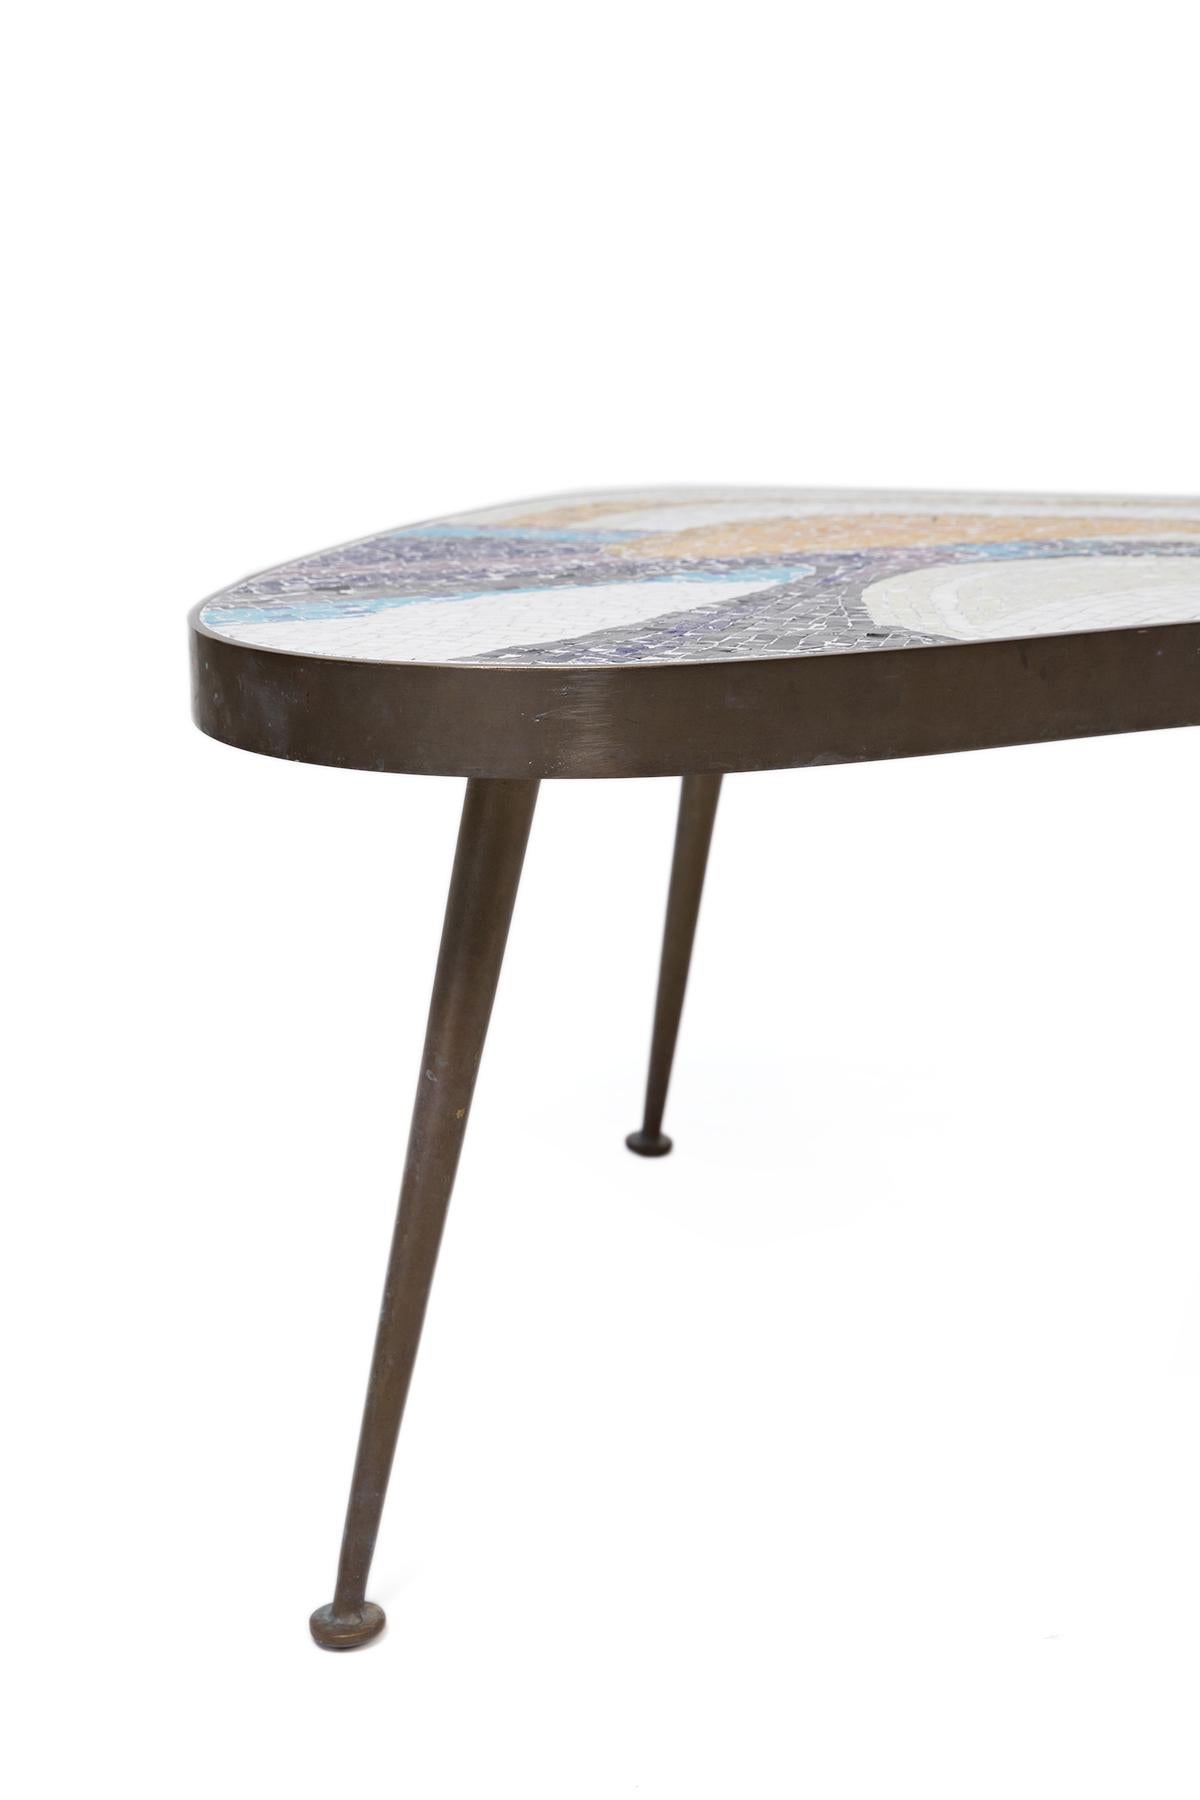 North American Margot Stewart Mosaic and Patinated Brass Freeform Coffee Table